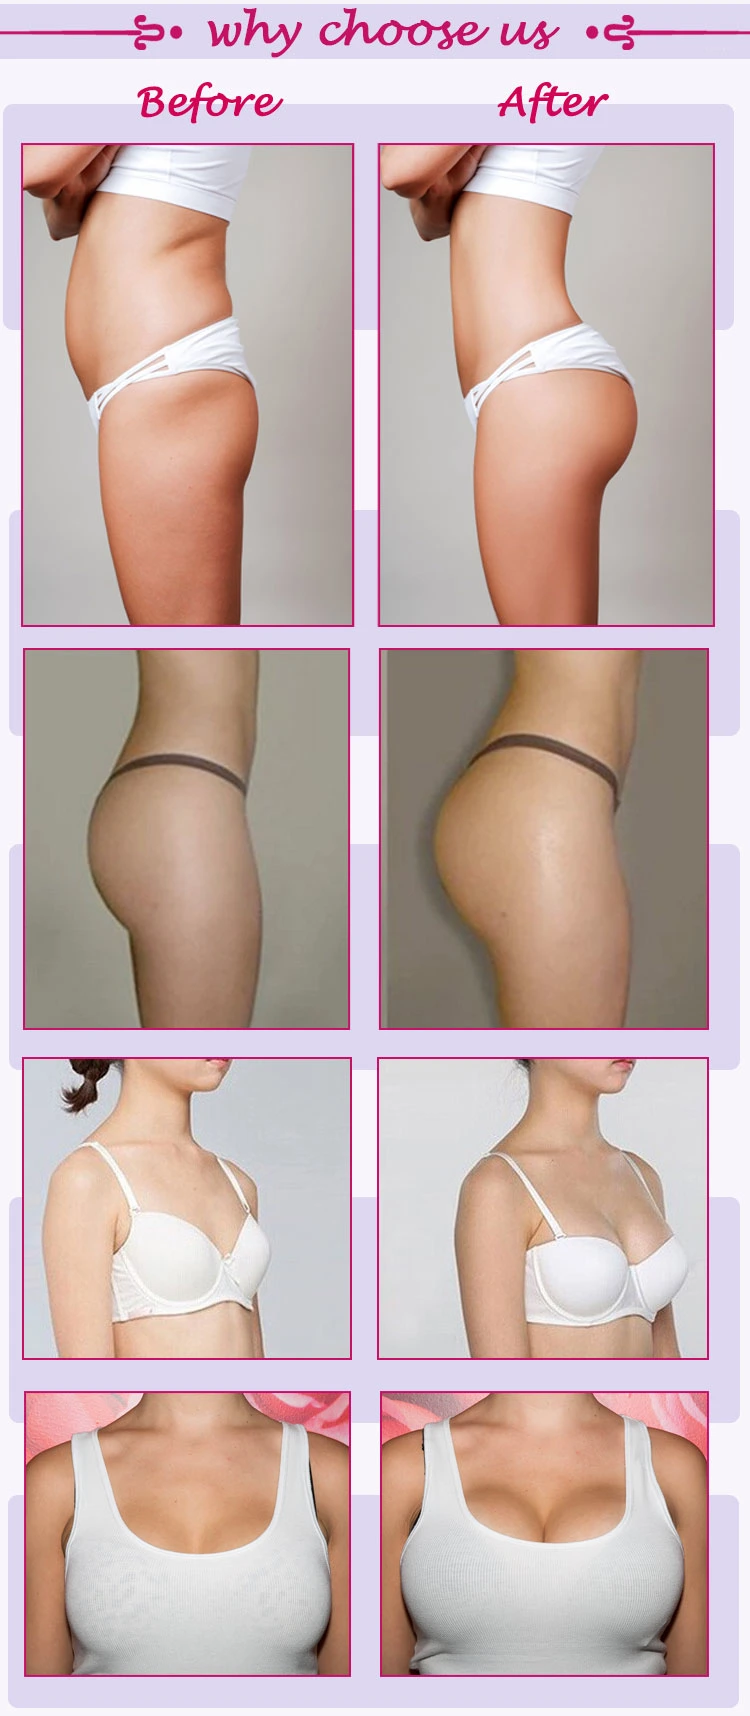 Best Selling Products Skin Care and Buttock Enlargement Hyaluronic Acid Filler